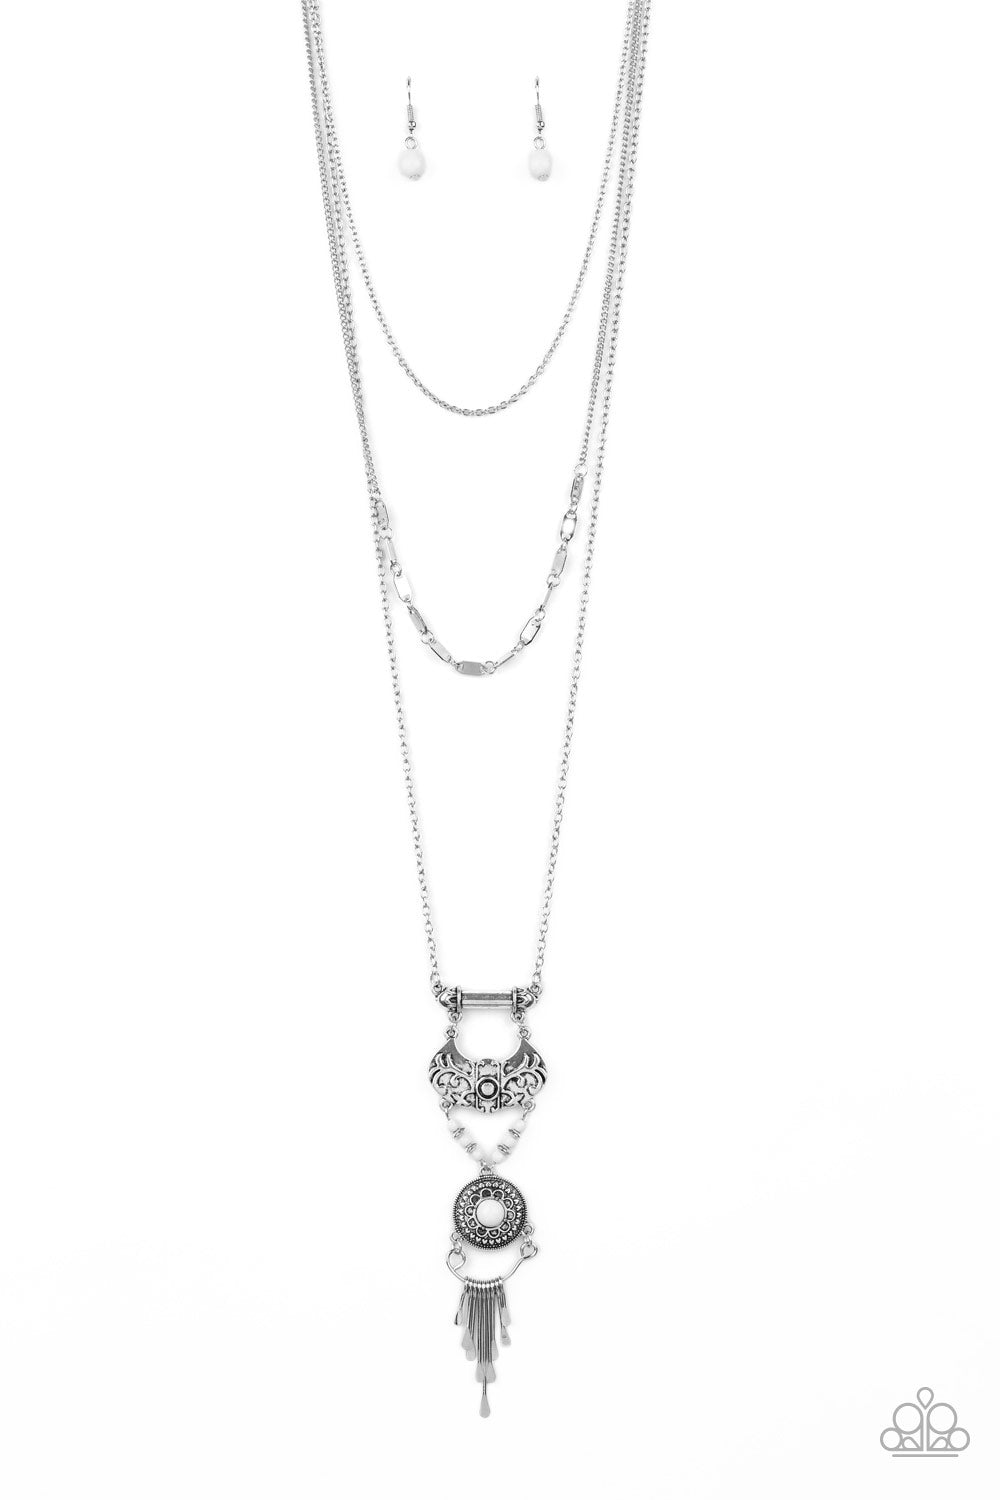 shimmery silver chains layer down with a BOHO styled charm at the bottom. Classy look for any occassion.